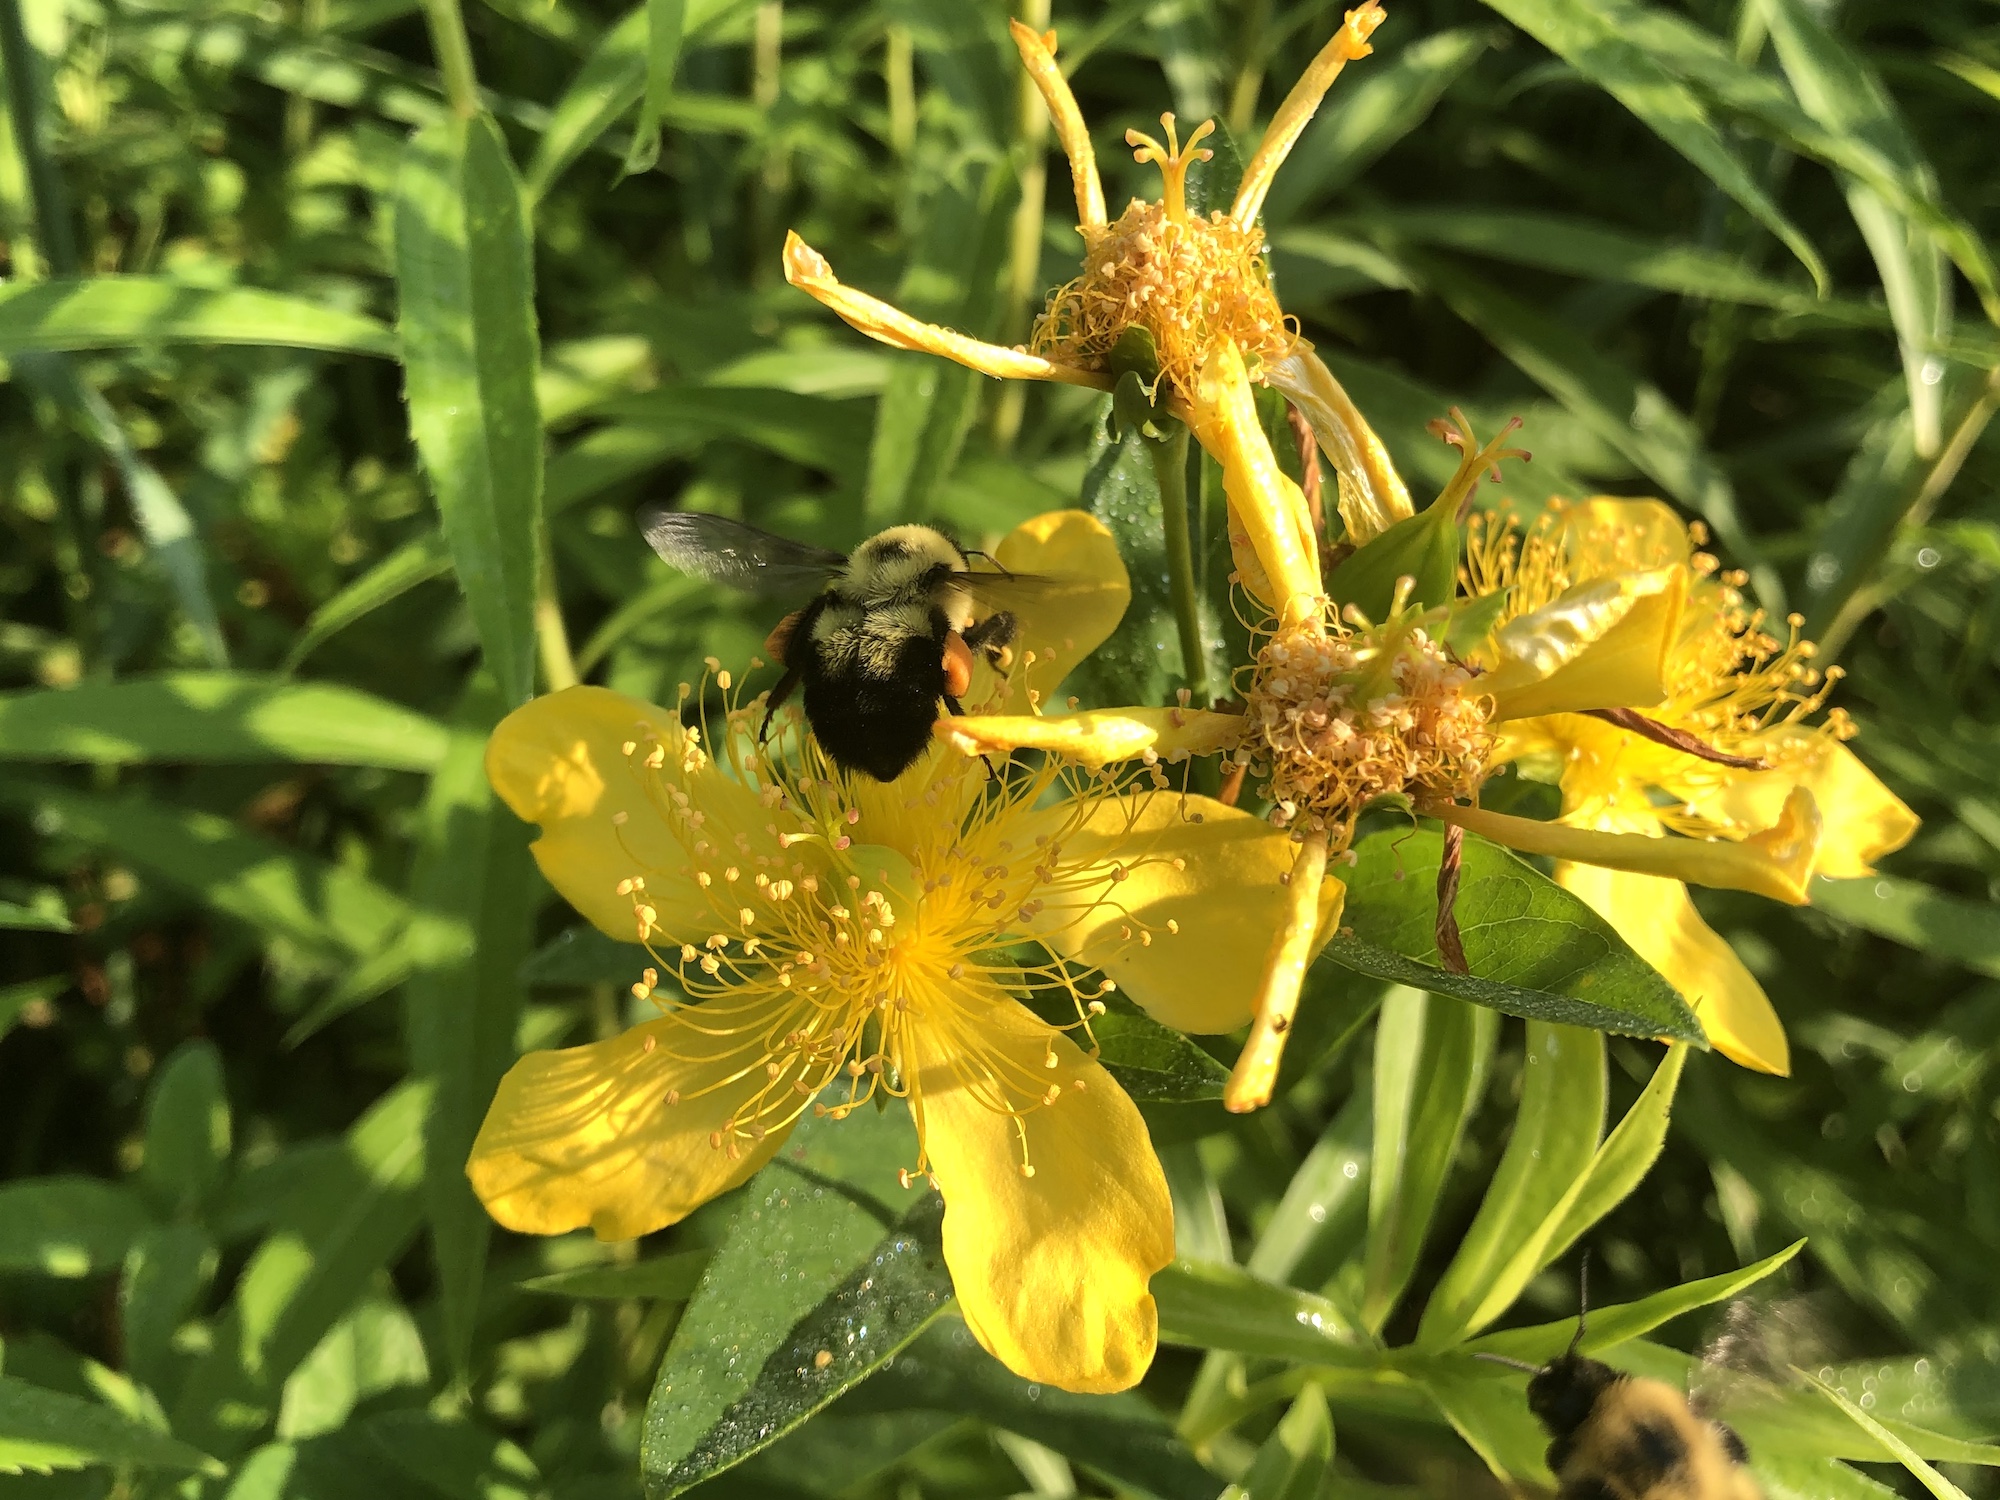 Great St. John's wort on bank of Marion Dunn Pond on July 8, 2019.